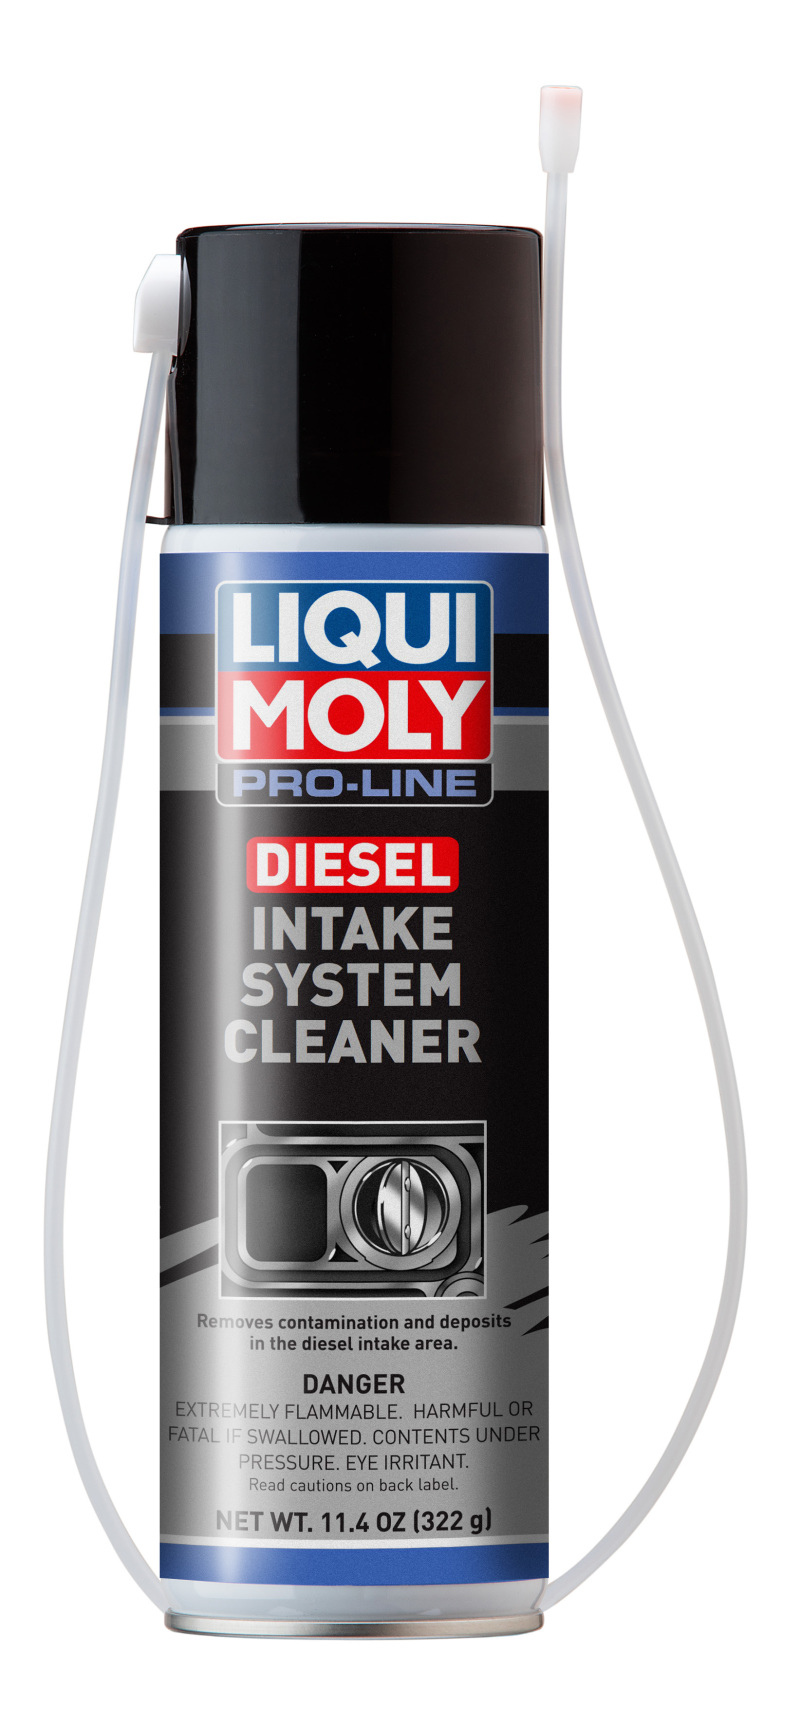 LIQUI MOLY 400mL Pro-Line Diesel Intake System Cleaner - 20208